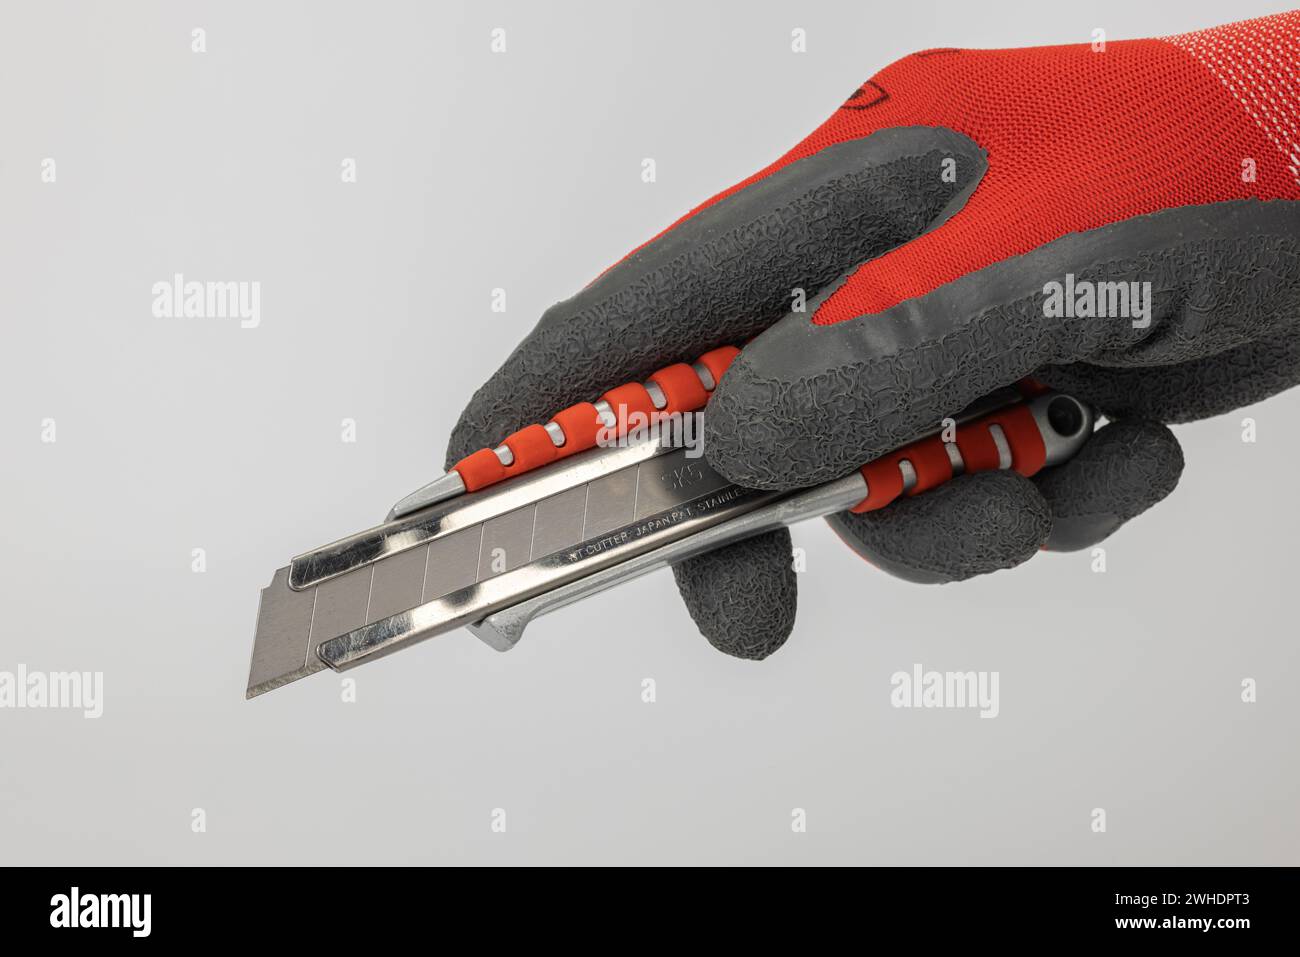 Man's hand with work glove holding cutter knife with 18 mm snap-off blade, die-cast aluminum with rubberized red grip zone, white background, Stock Photo